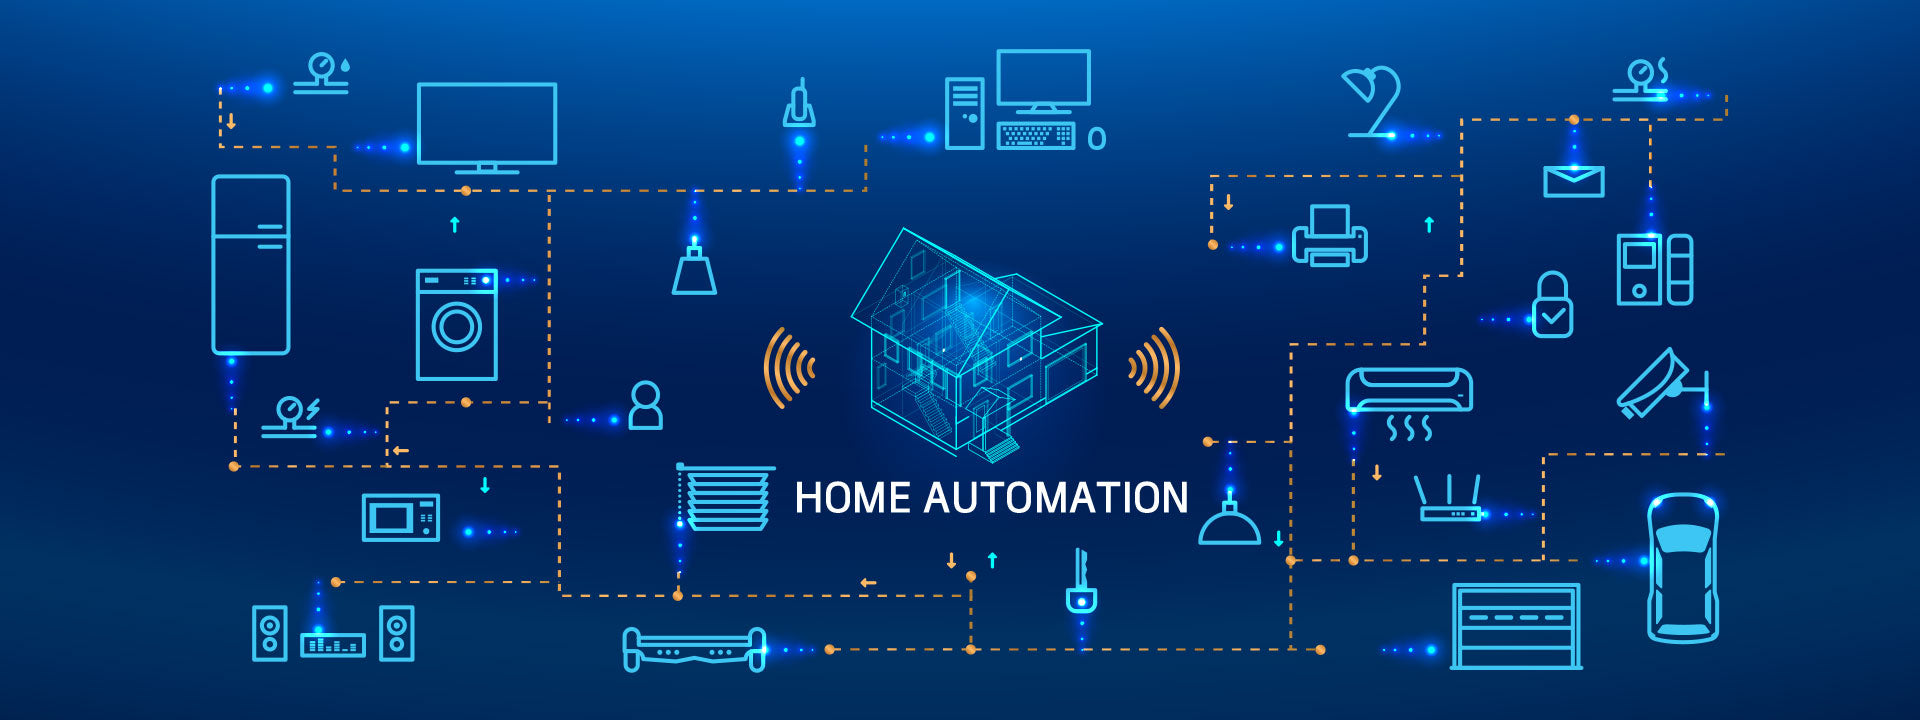 Smart Home 101: How to Get Started with Home Automation